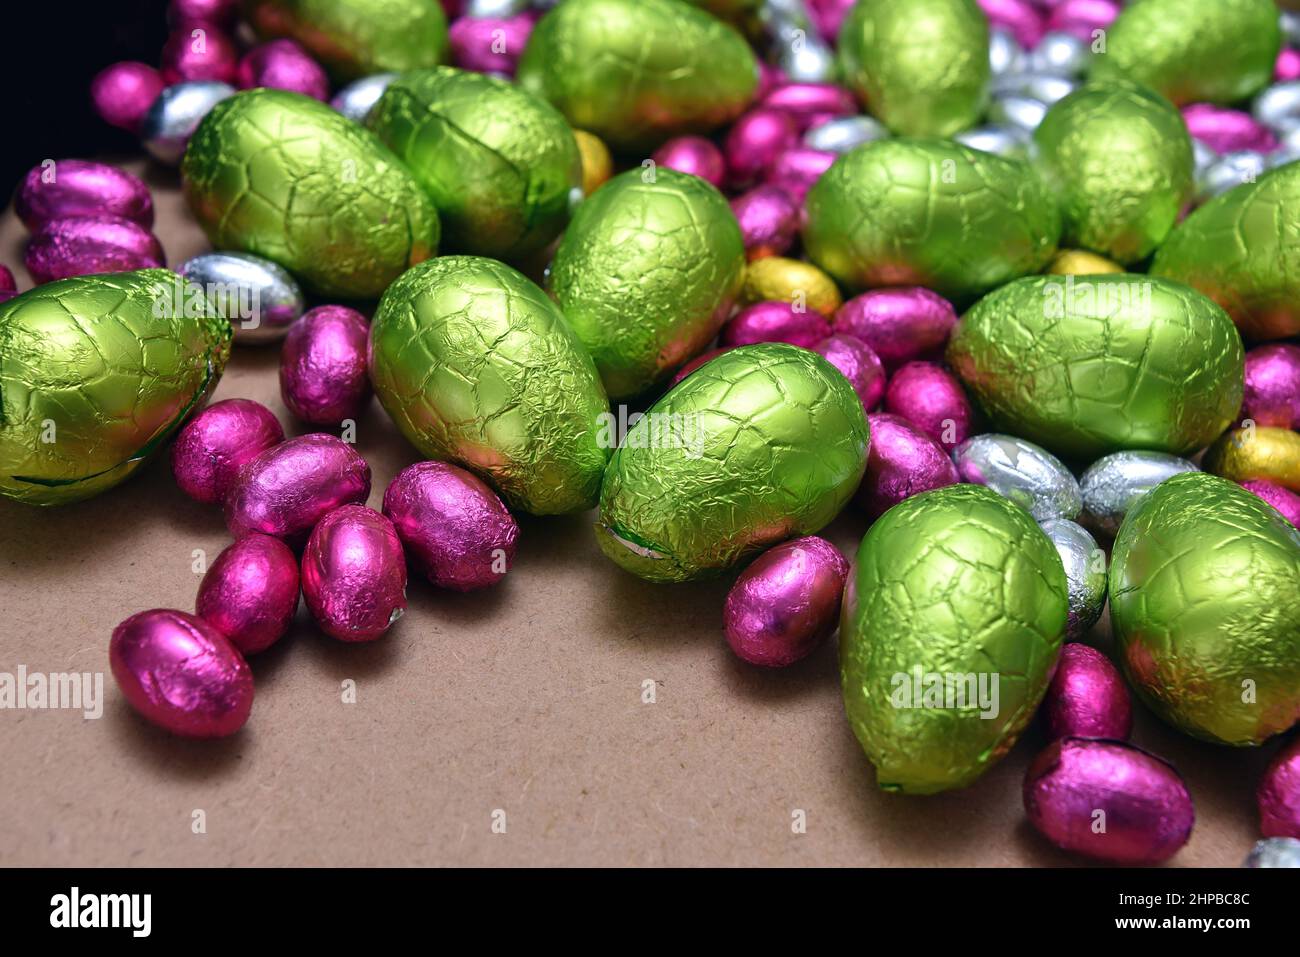 Small pink, yellow, green and silver foil wrapped chocolate easter eggs with larger lime green eggs, against a pale wood background. Stock Photo